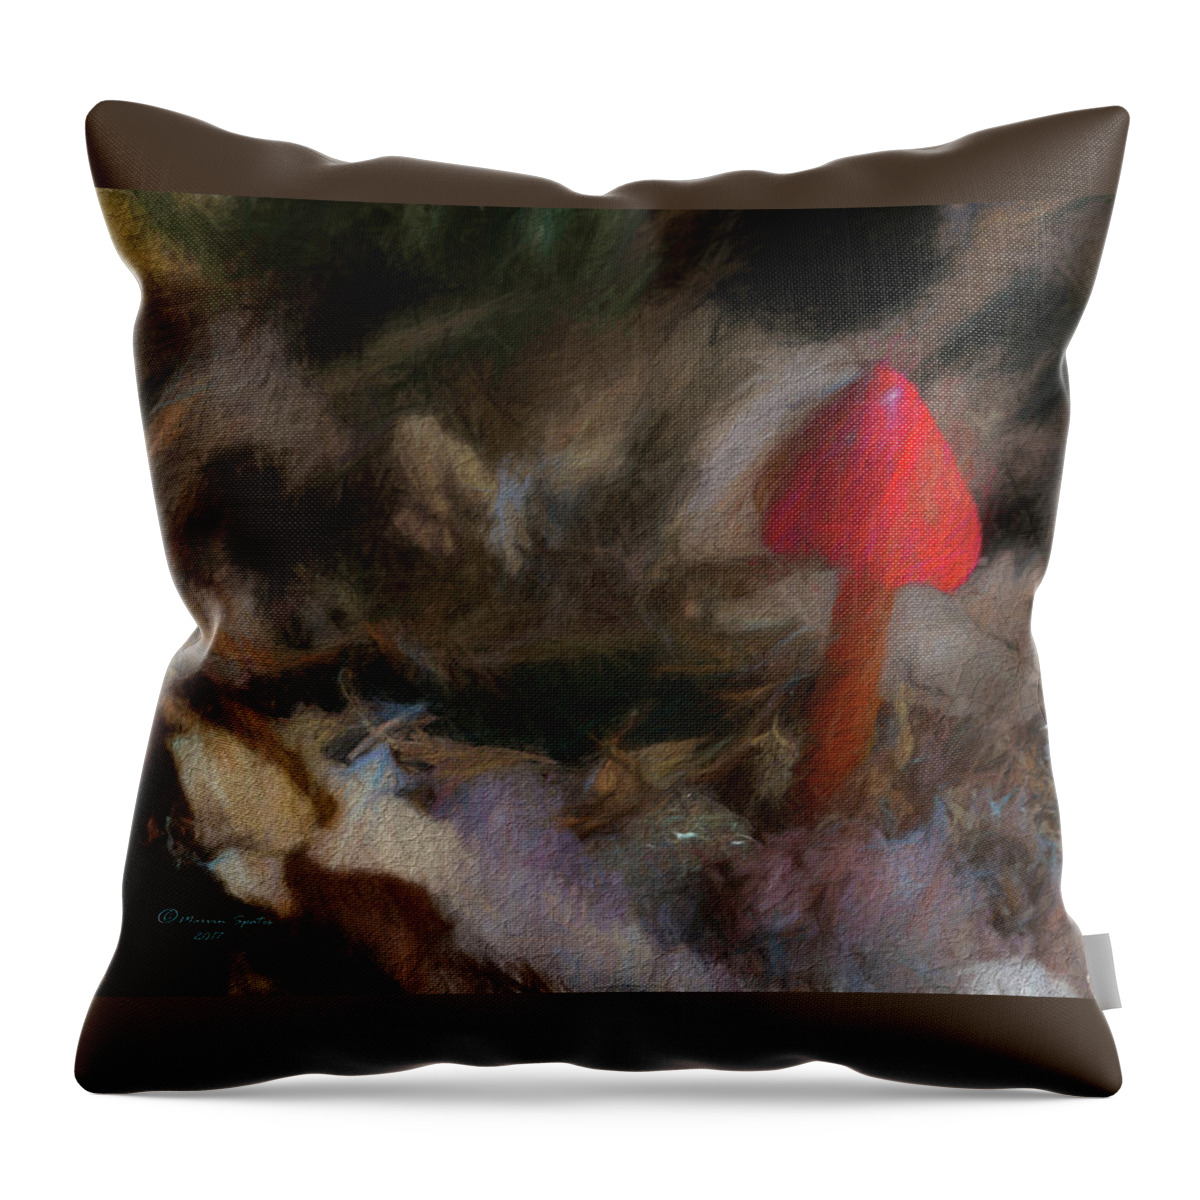 Poison Throw Pillow featuring the photograph Red Forest Mushroom by Marvin Spates